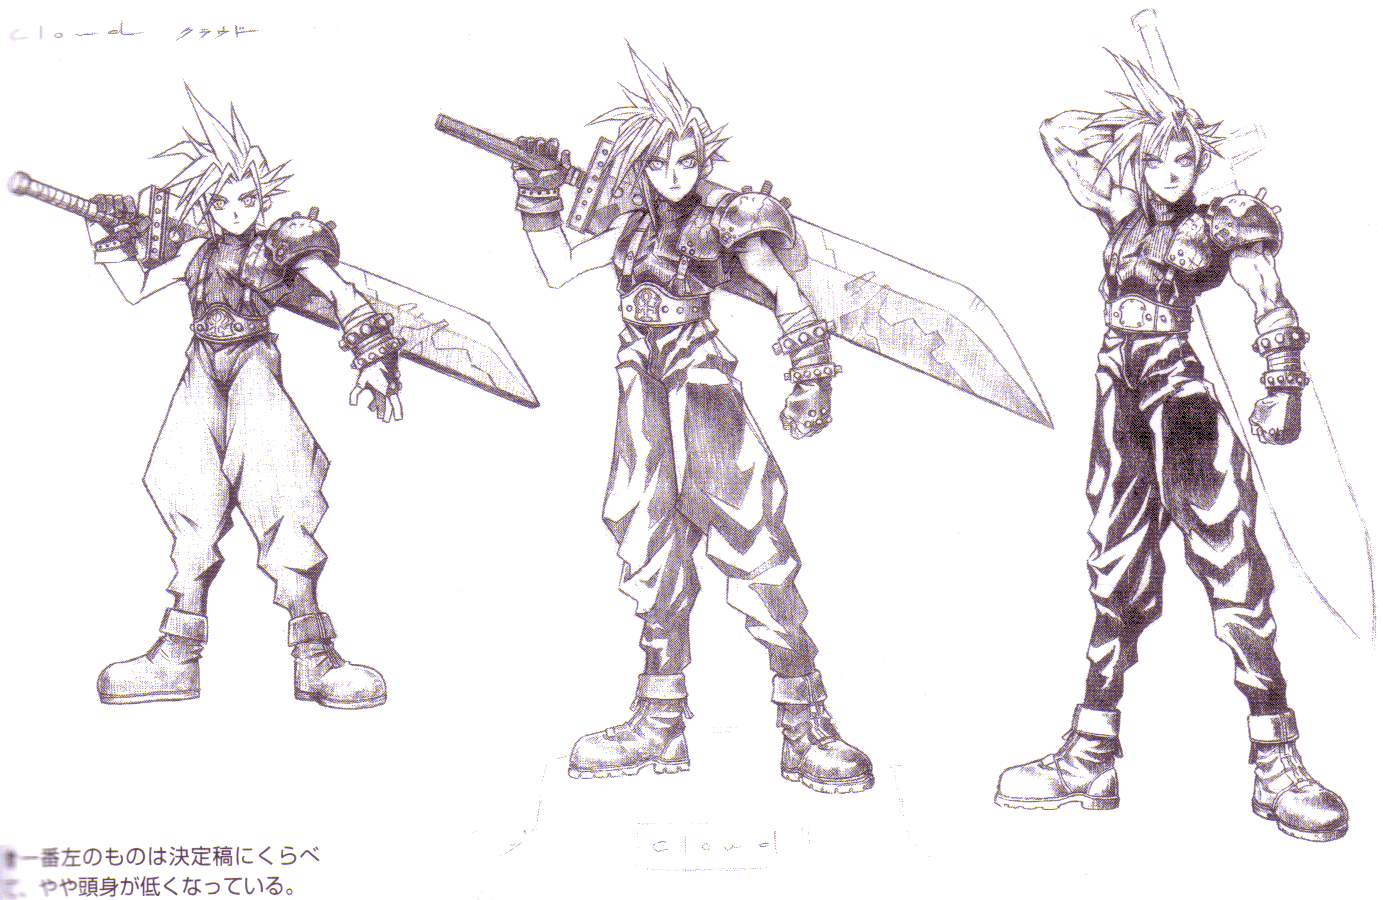 http://img3.wikia.nocookie.net/__cb20080714140340/finalfantasy/images/archive/7/7c/20130202110320!Cloud_Strife_Sketch.png